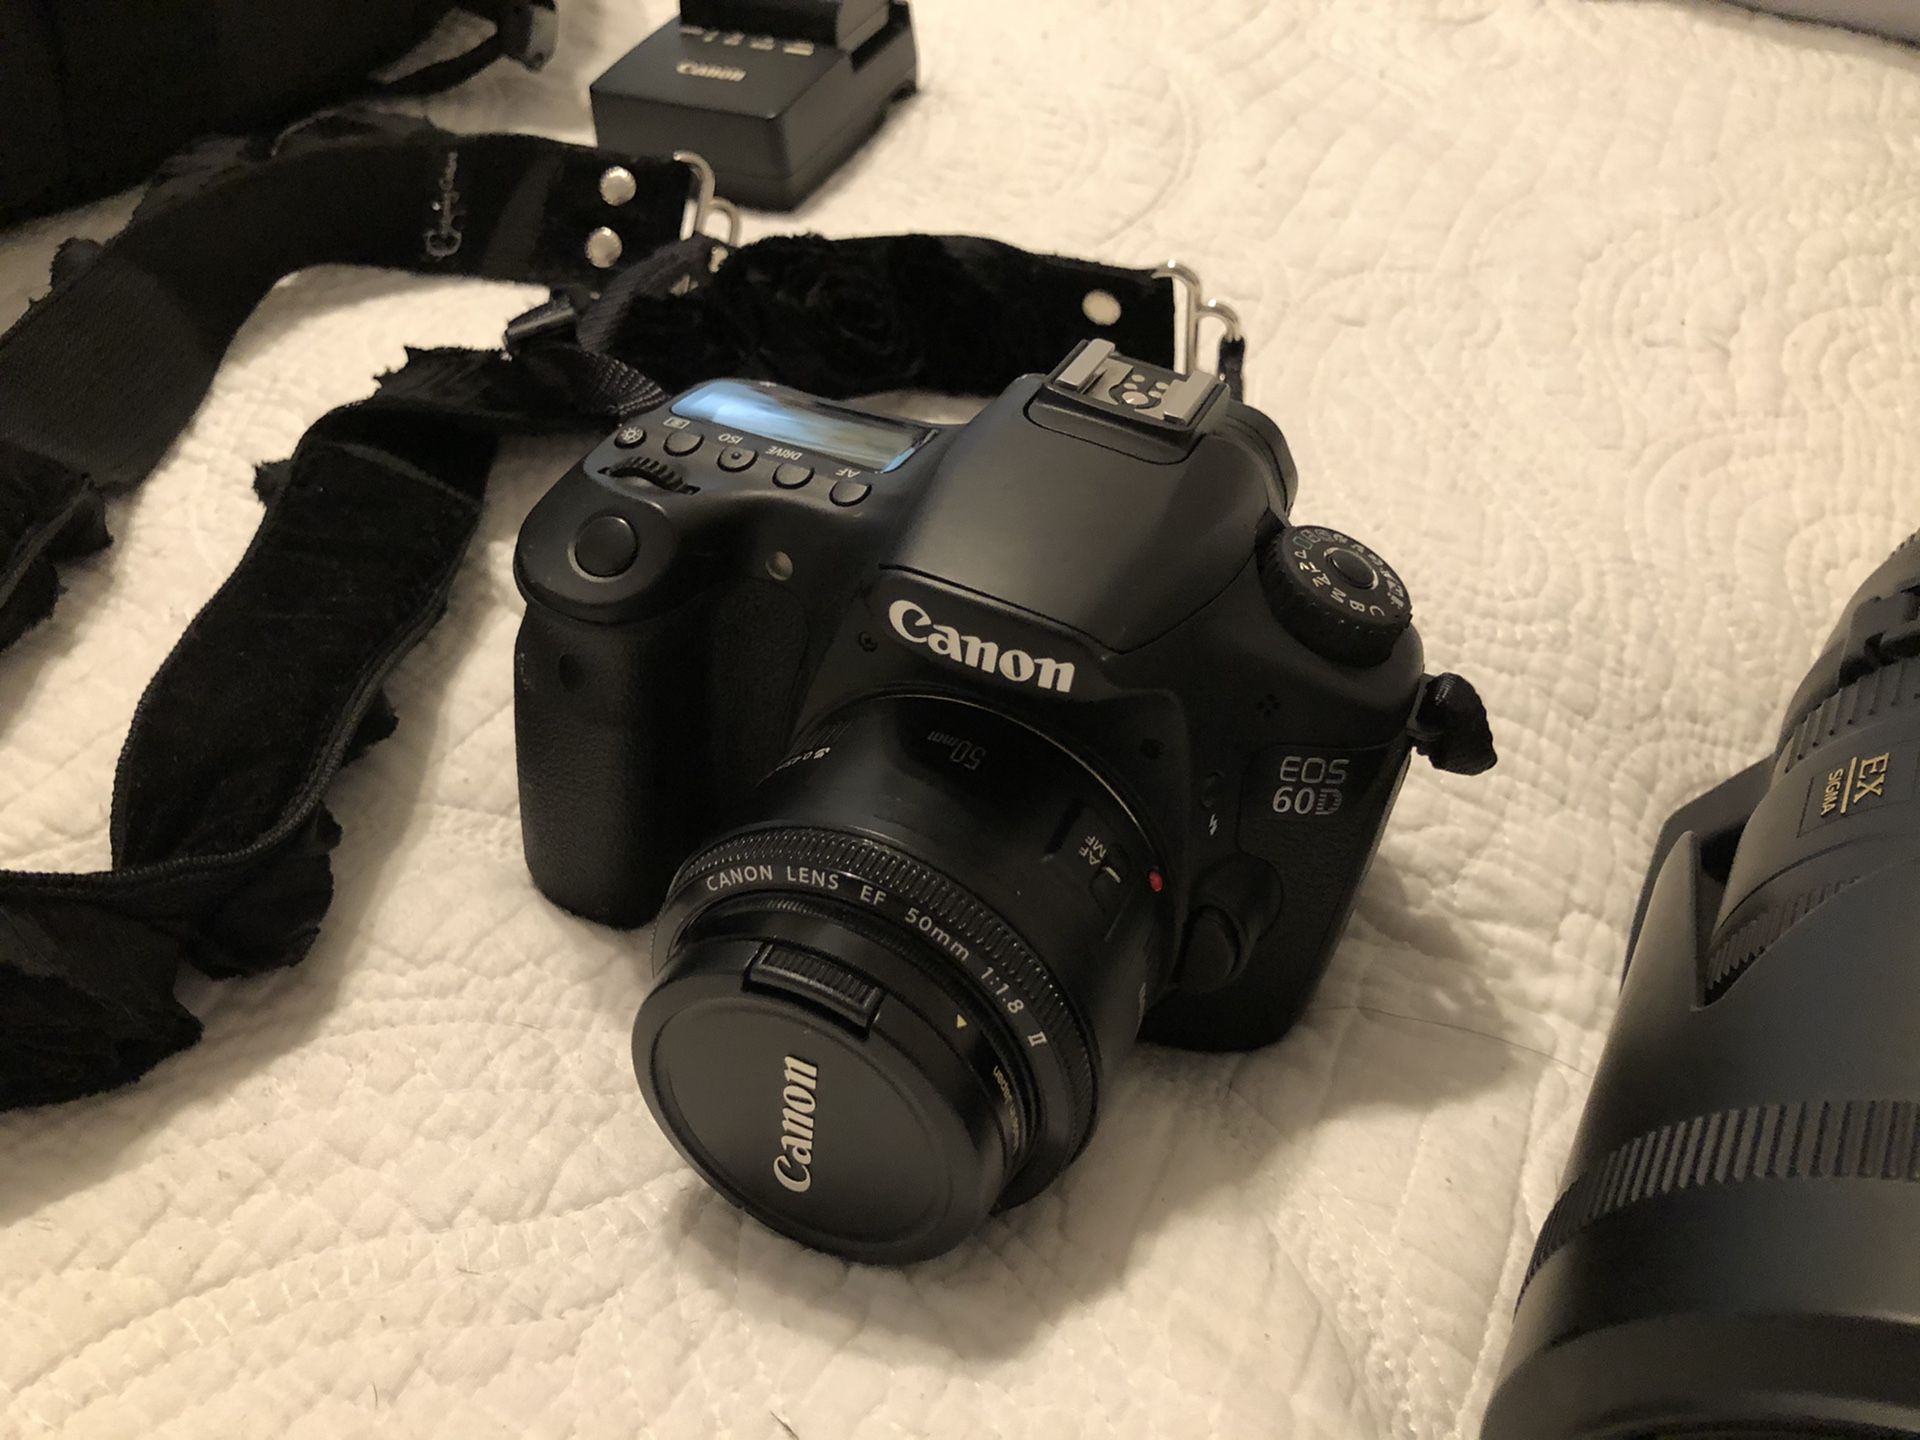 Canon 60D Like new. $450